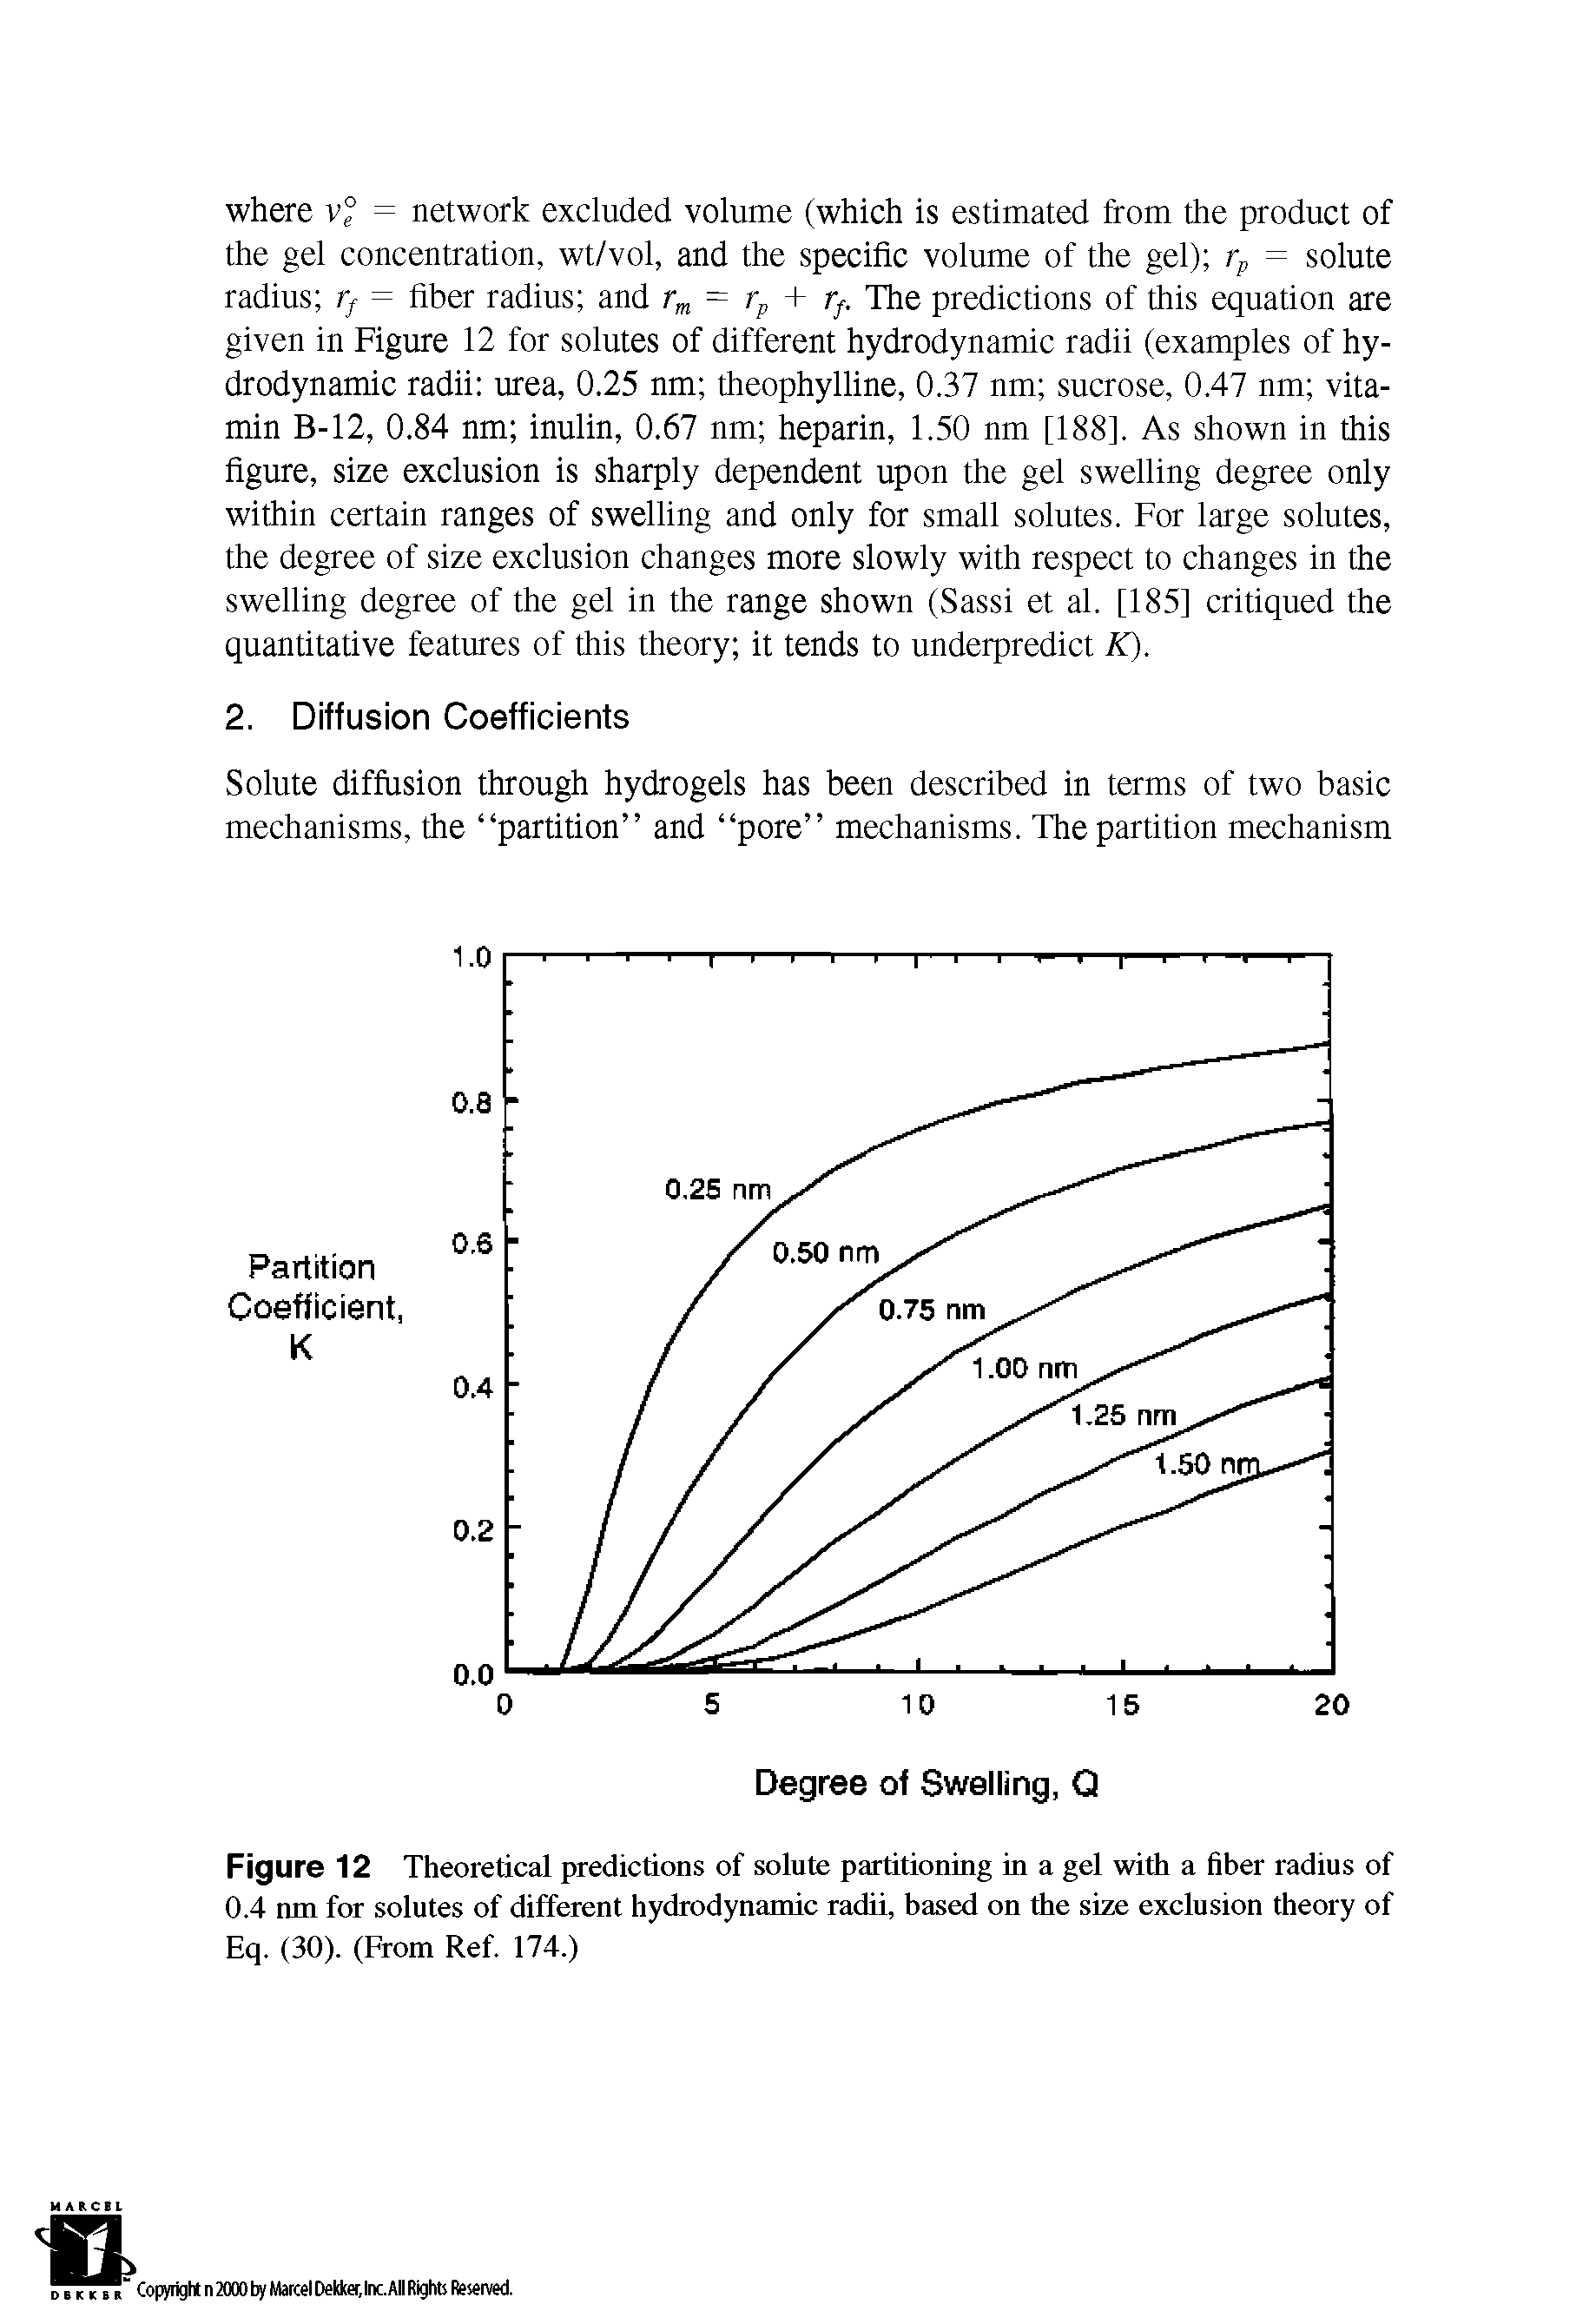 Figure 12 Theoretical predictions of solute partitioning in a gel with a fiber radius of 0.4 nm for solutes of different hydrodynamic radii, based on the size exclusion theory of Eq. (30). (From Ref. 174.)...